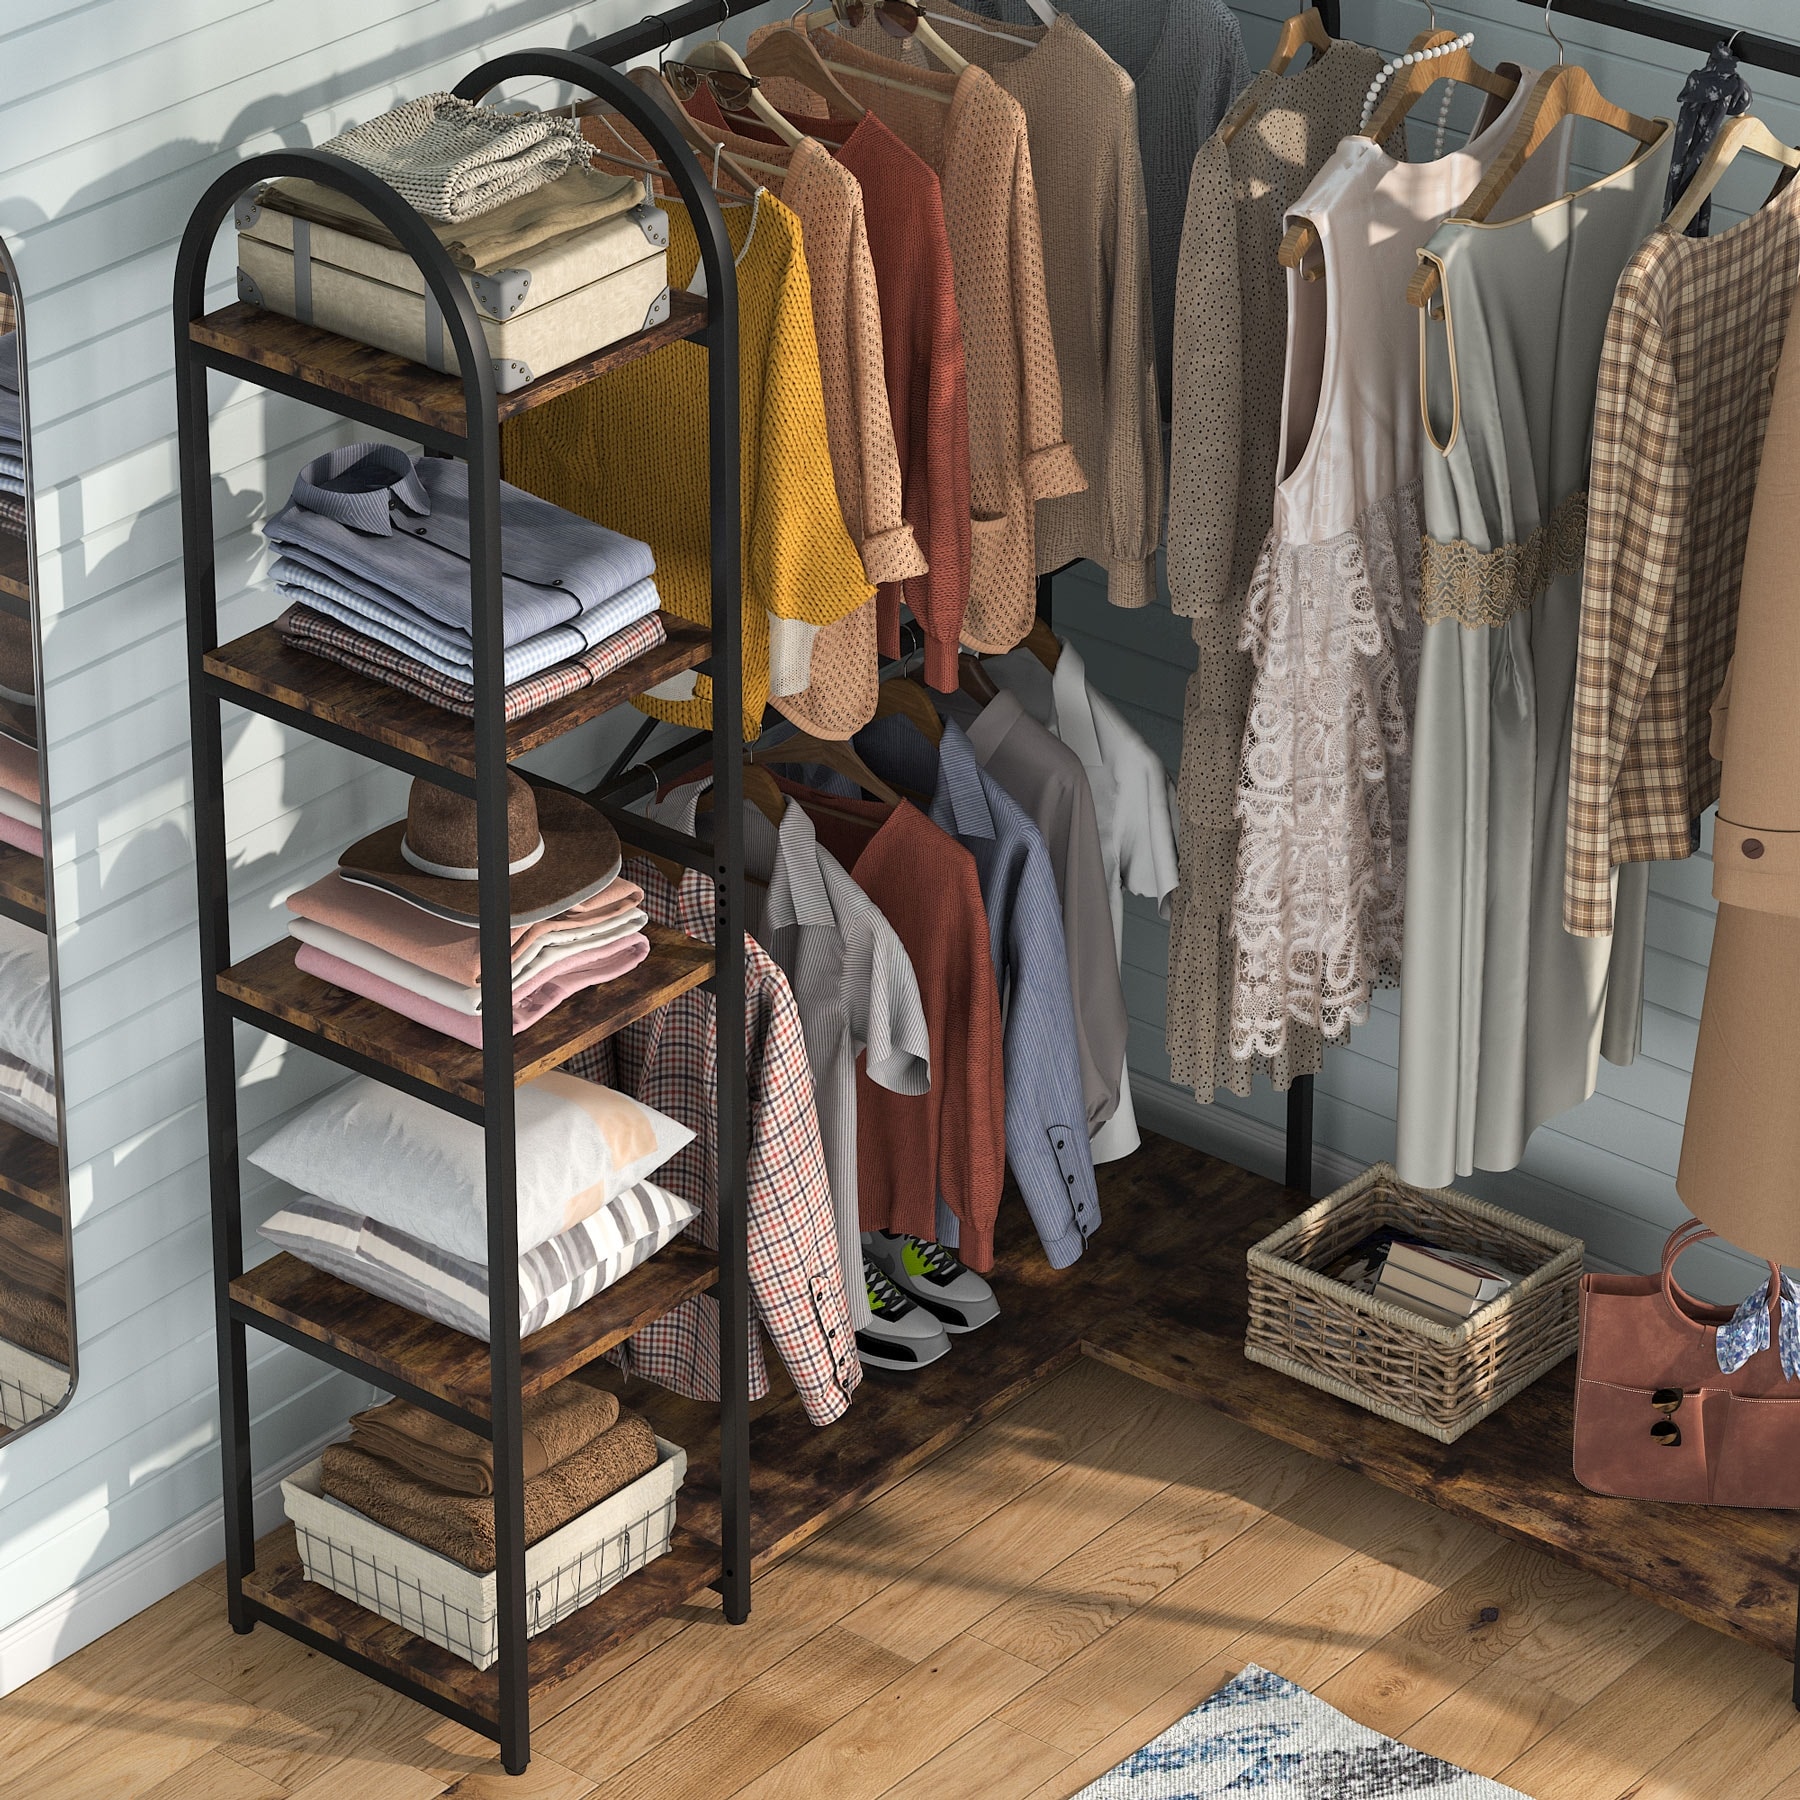 https://ak1.ostkcdn.com/images/products/is/images/direct/3c3c7e0c32ba84484b8f068297eaf20cdb1bc1fa/Industrial-L-Shaped-Closet-Organizer%2C-Freestanding-Corner-Clothes-Garment-Rack-with-Hanging-Rods-and-Storage-Shelves.jpg